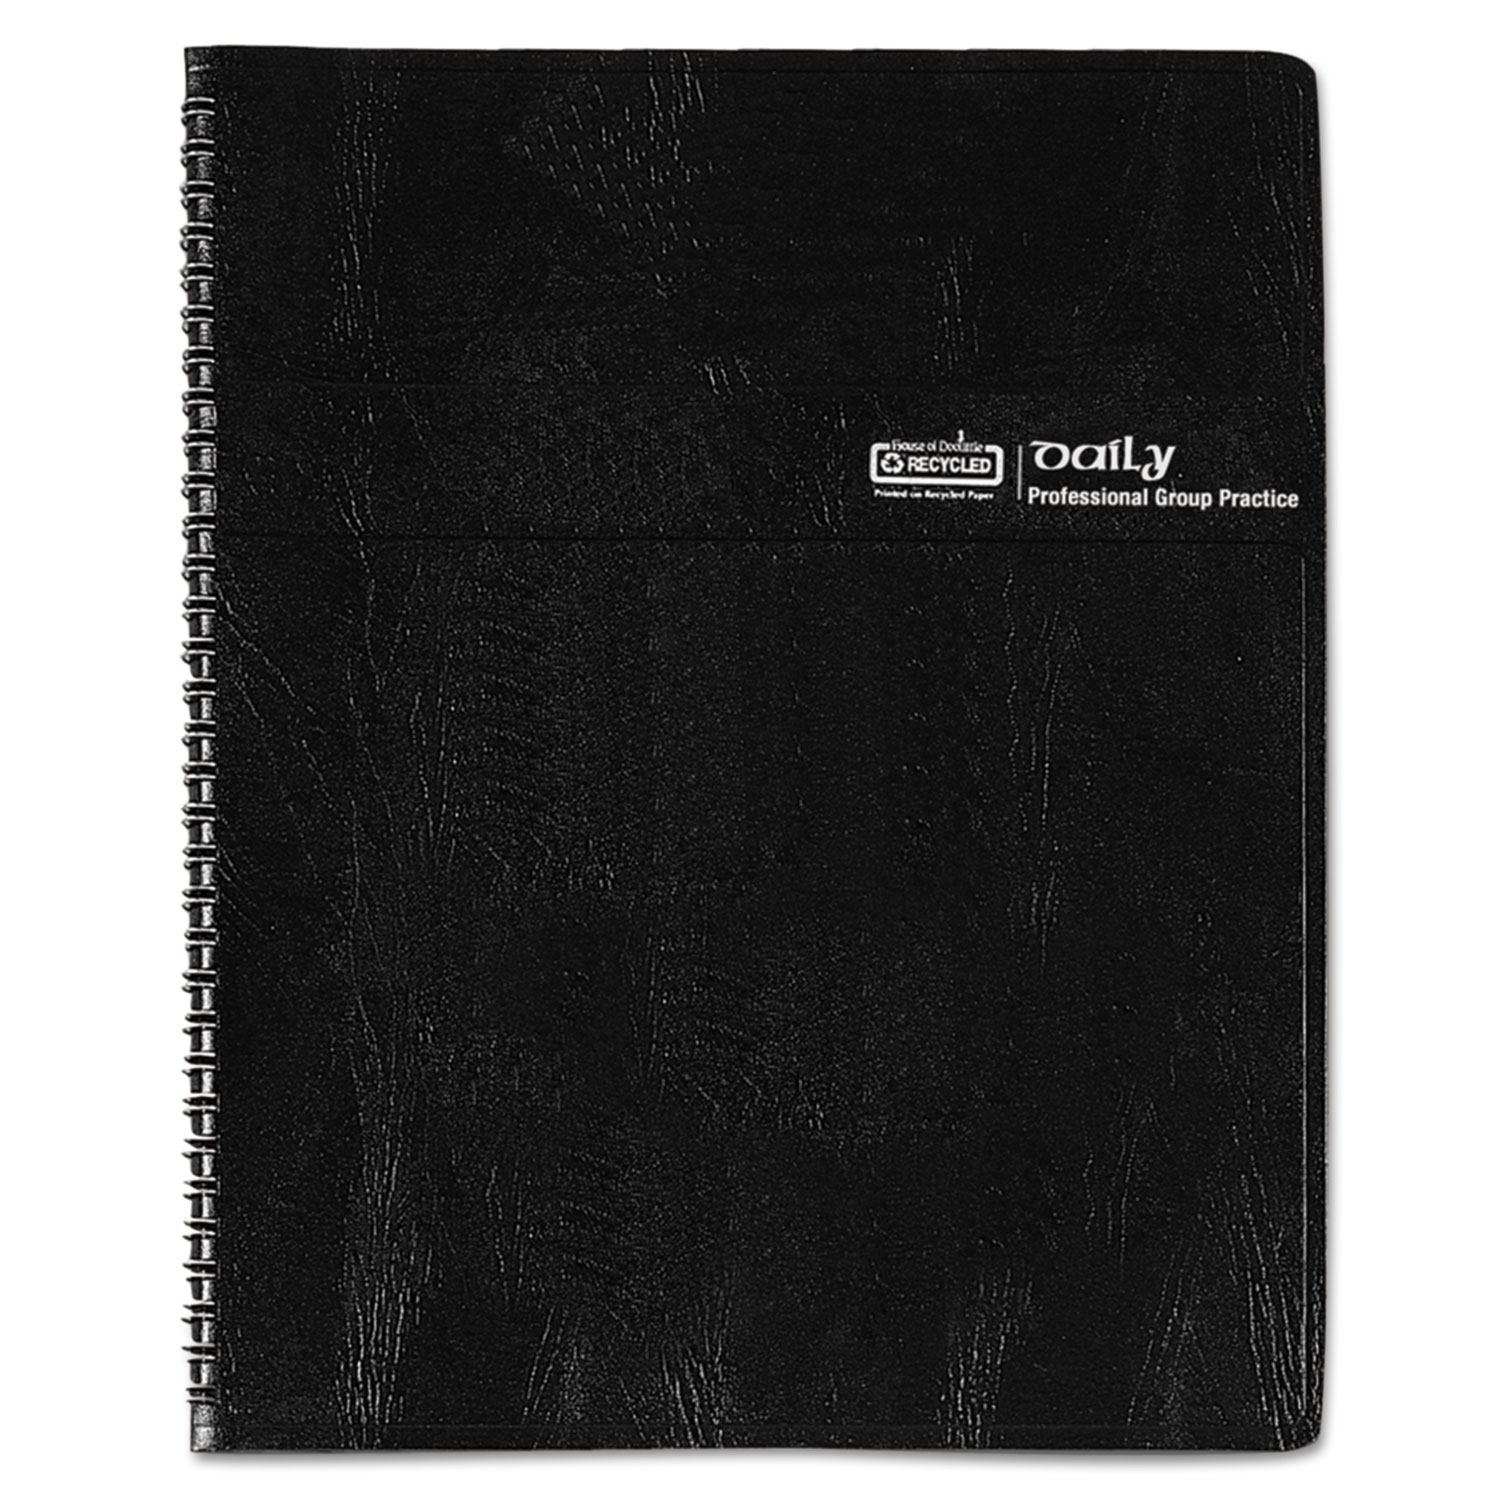 Eight-Person Group Practice Daily Appointment Book, 8 x 11, Black, 2018